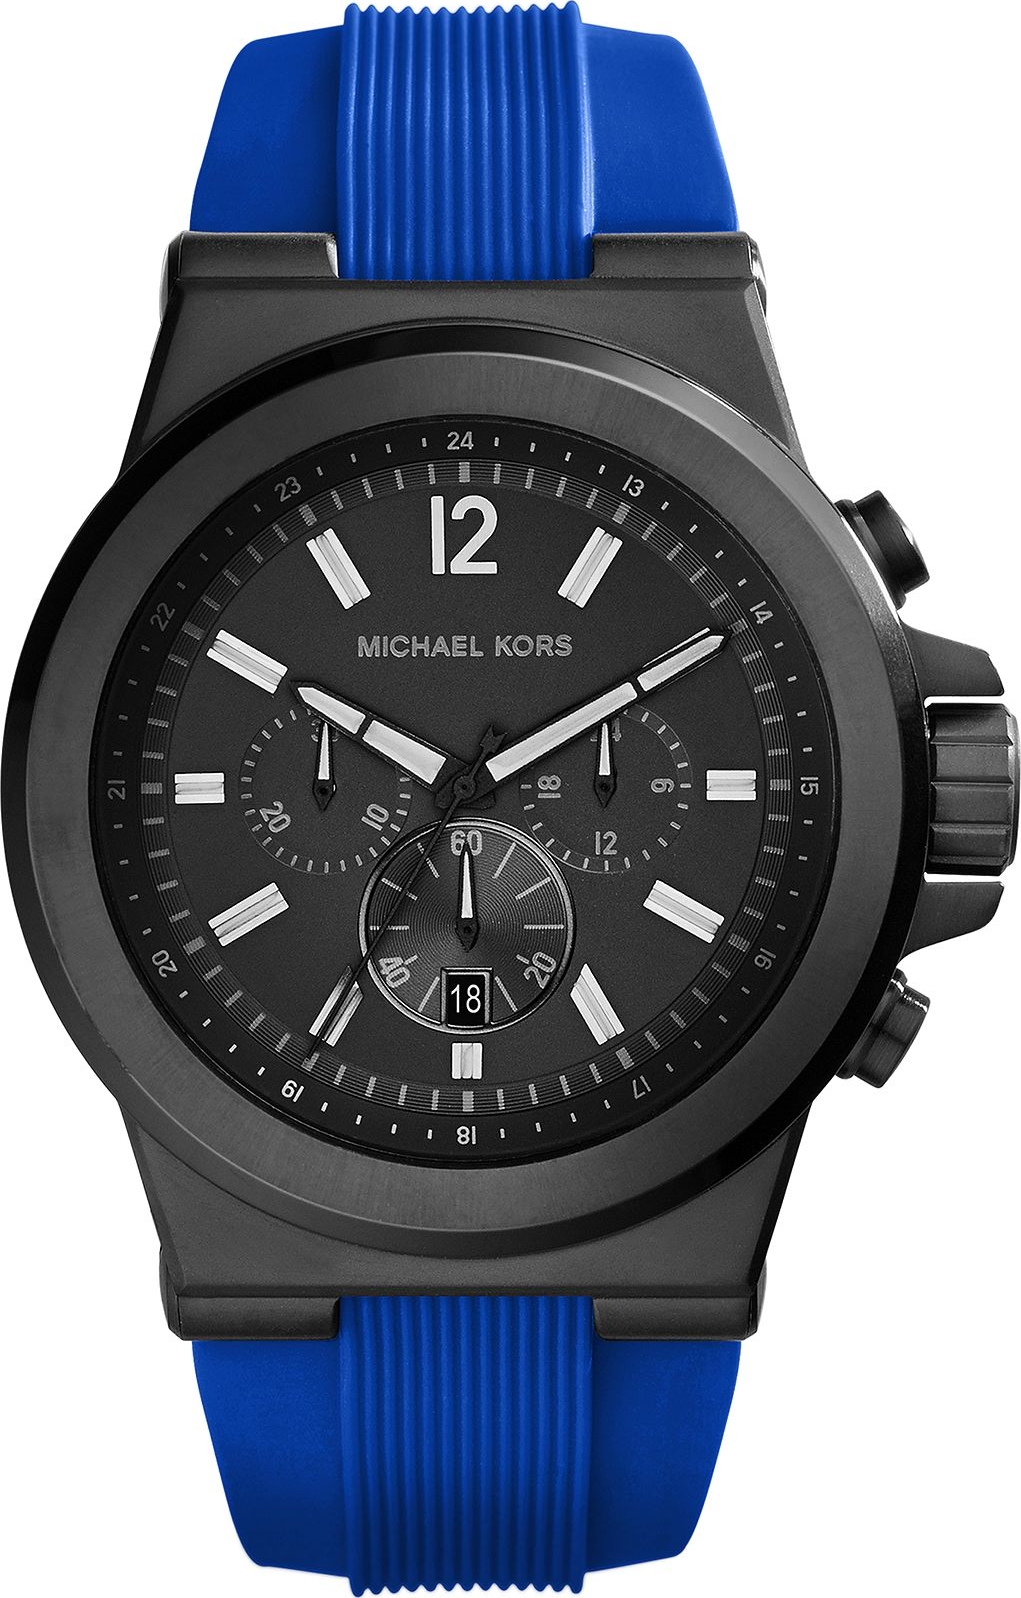 Michael Kors MK8357 Dylan Blue Silicone Watch 48mm